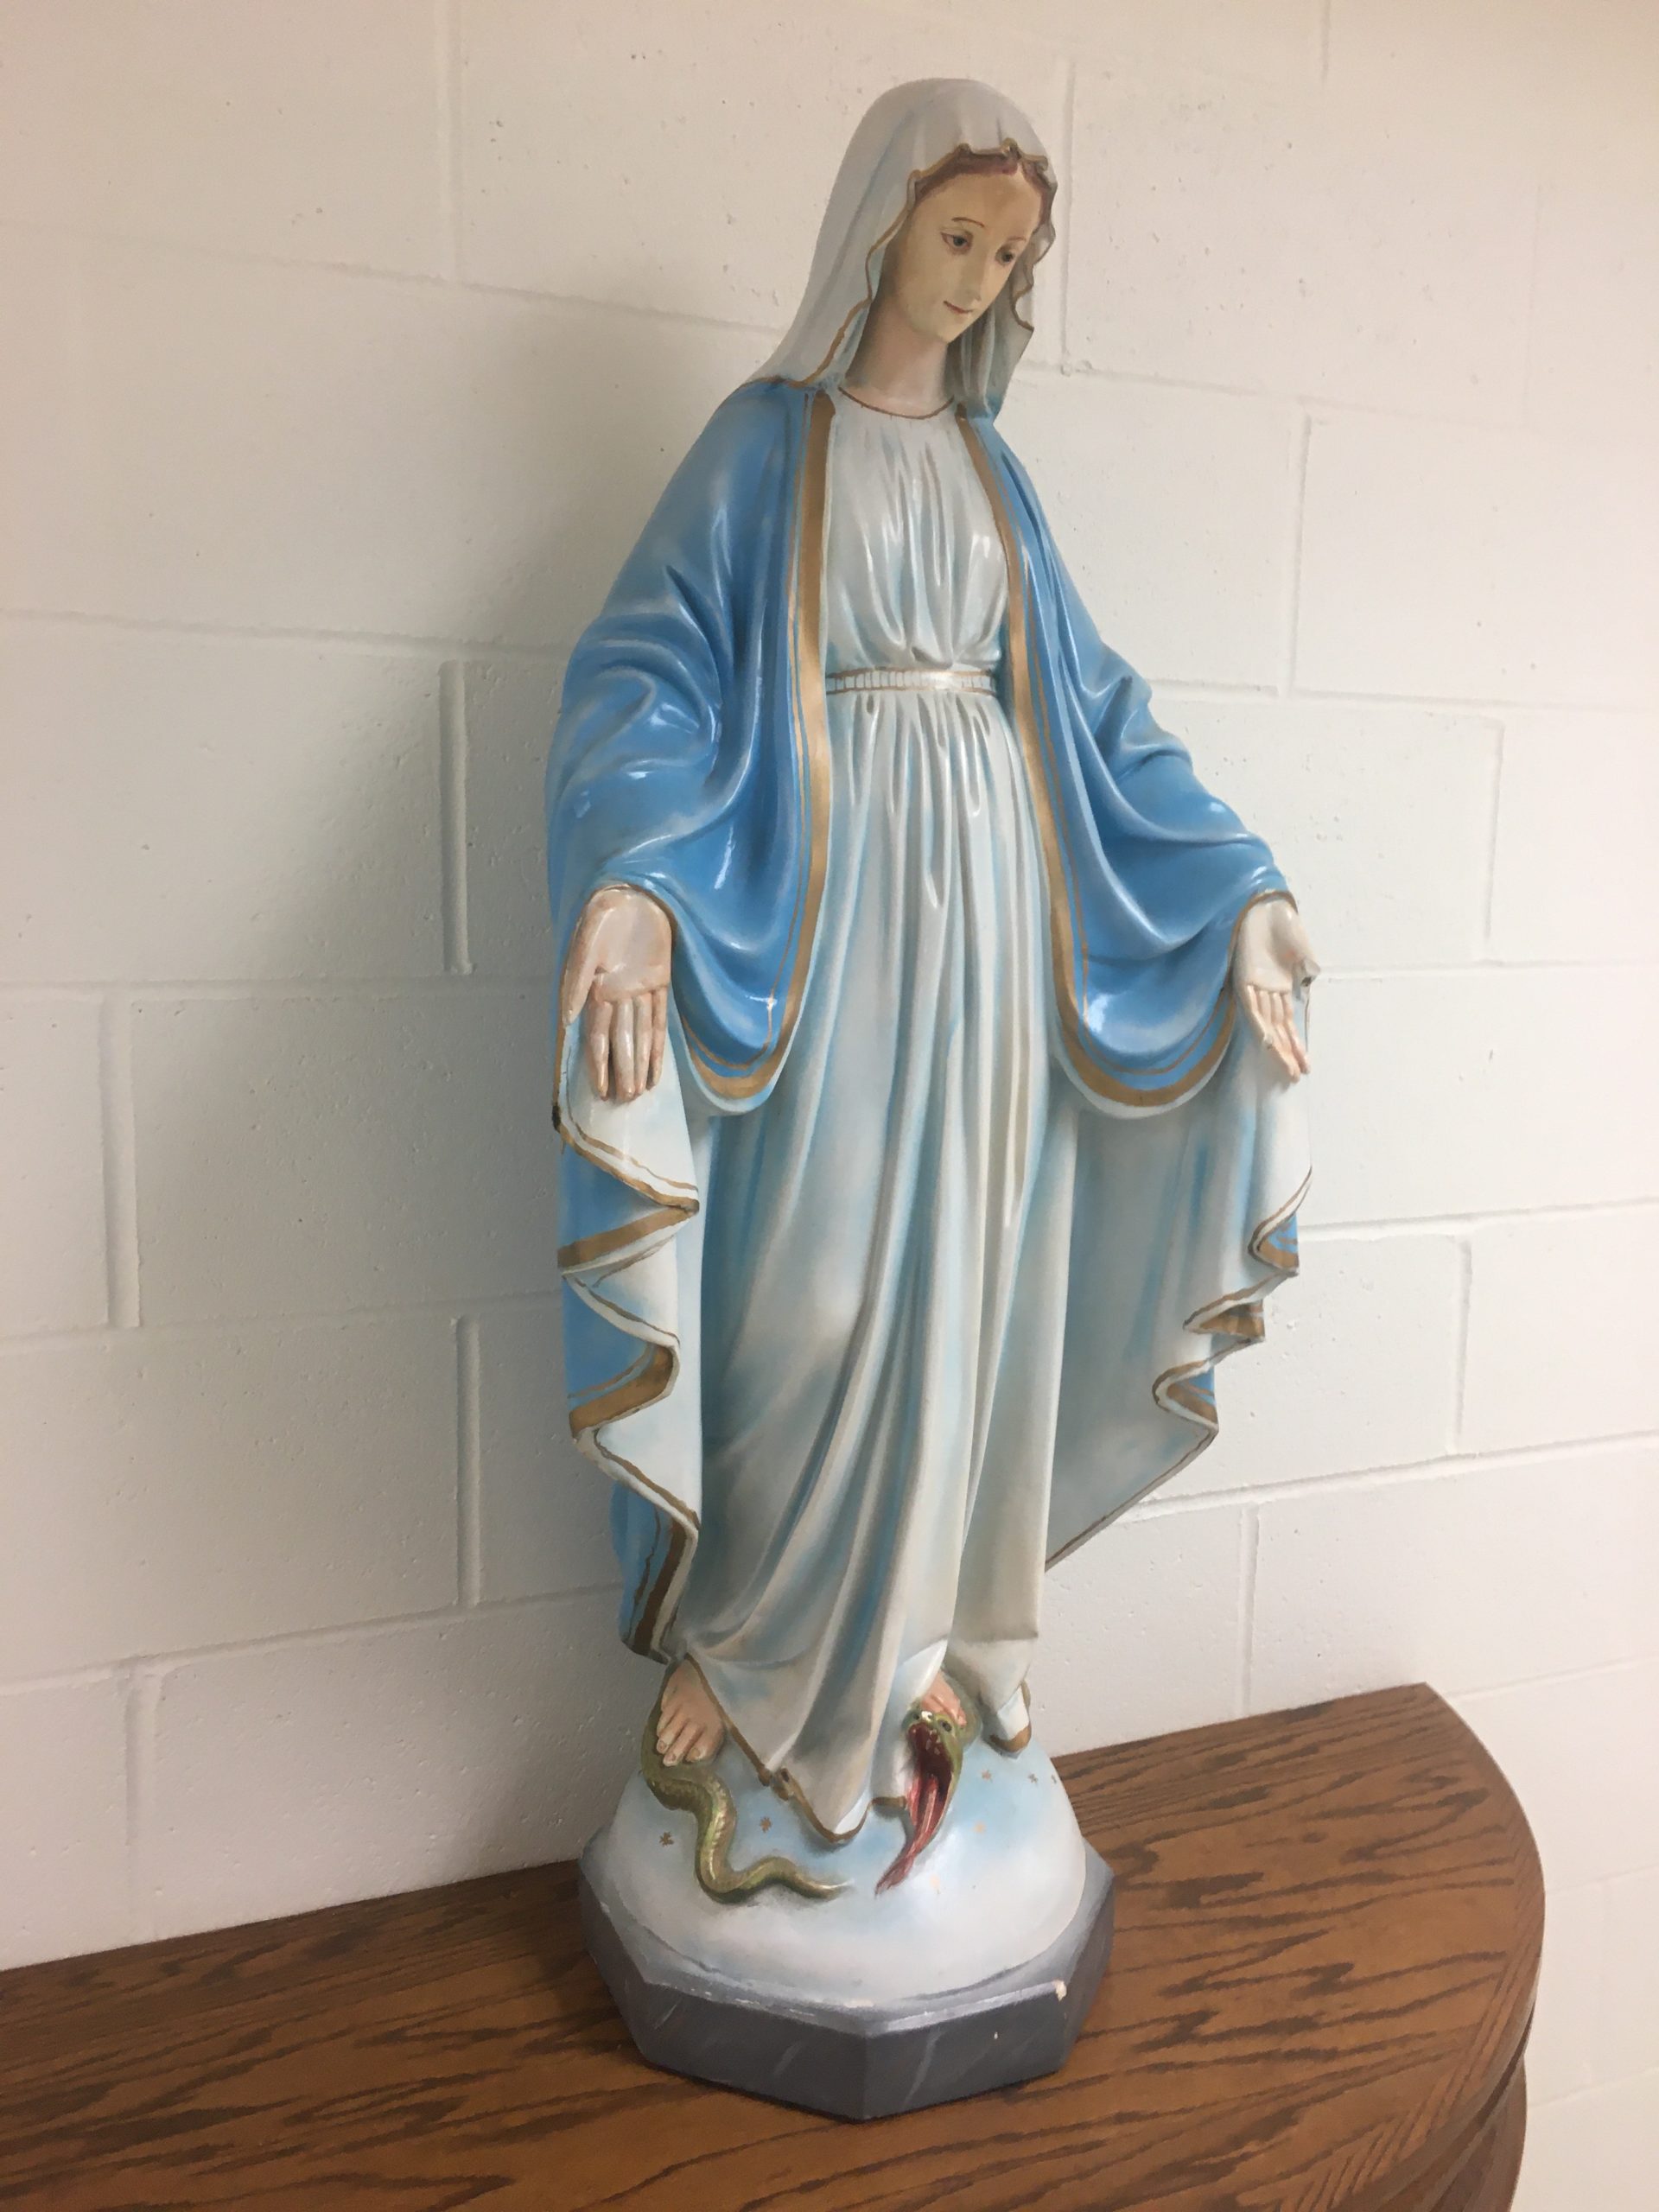 Statue of the Blessed Virgin Mary, now a centerpiece at Mater Dei Apostolate